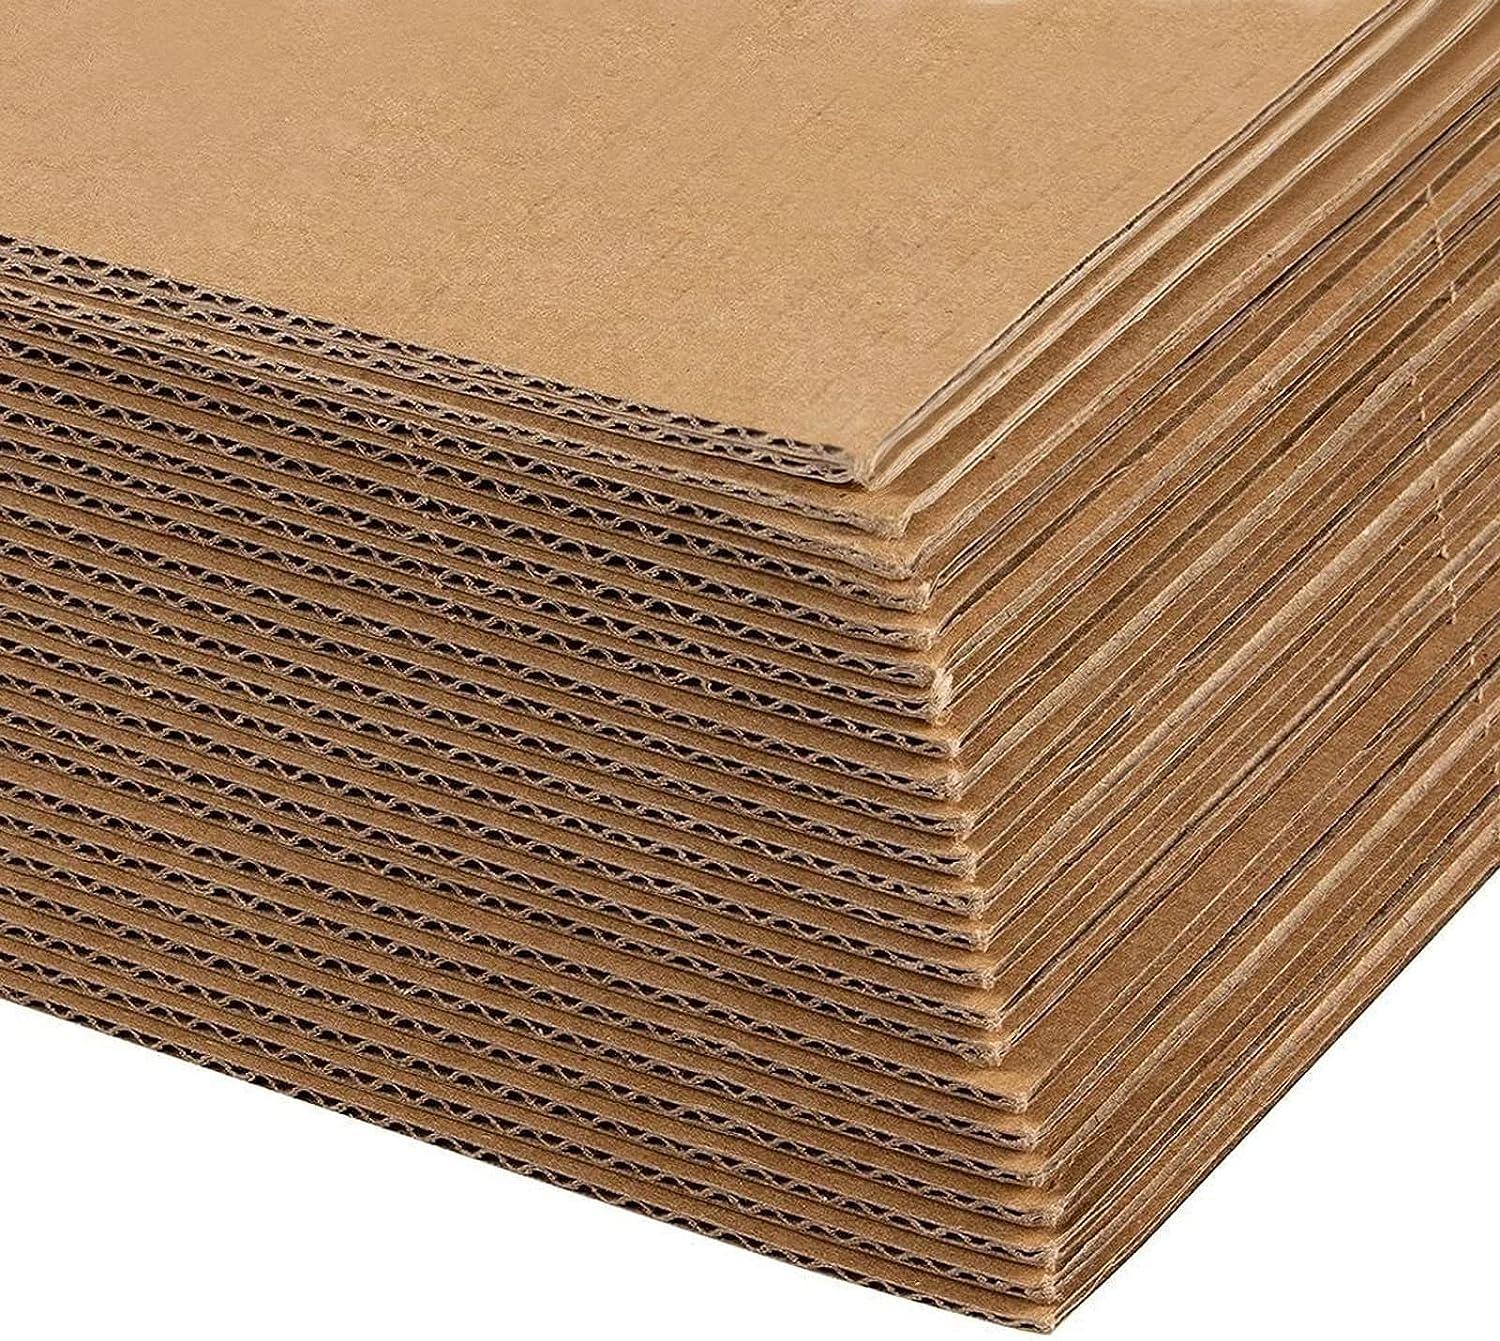 Coloured corrugated cardboard, 1 corrugated side and 1 smooth side